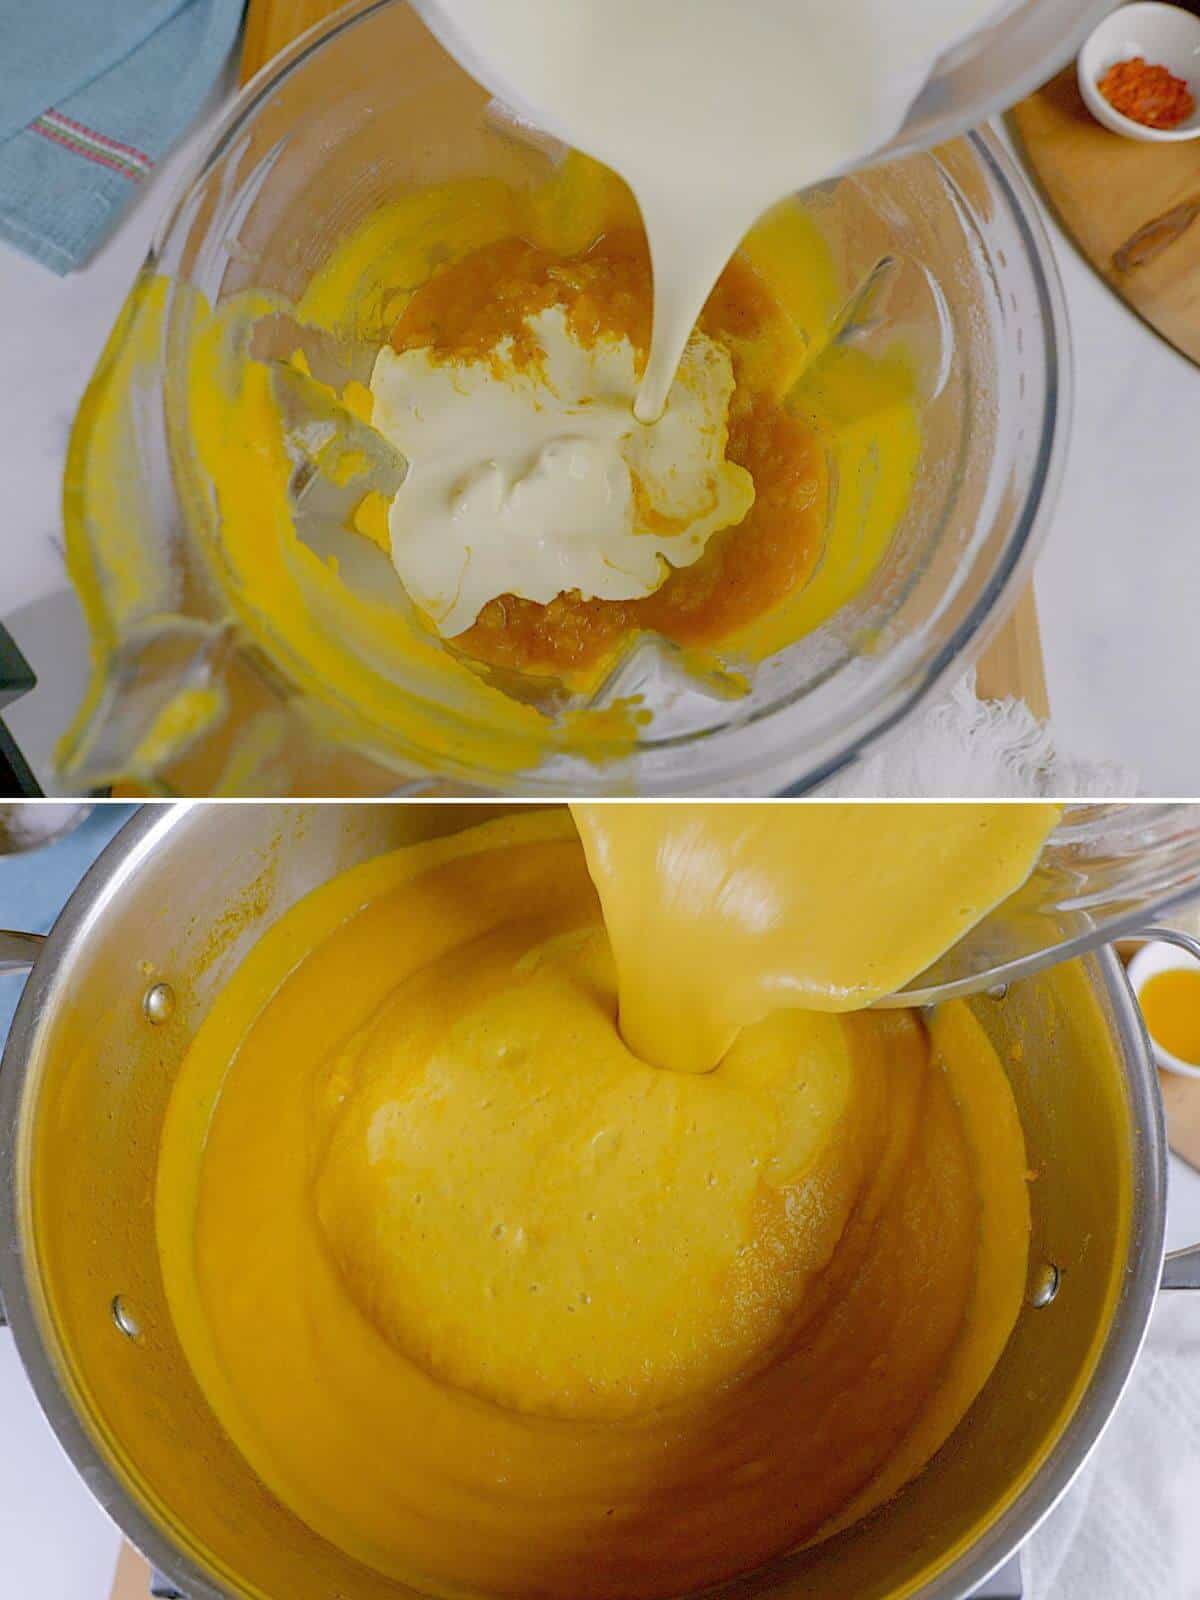 Blending creamy ingredients and adding it to pot.